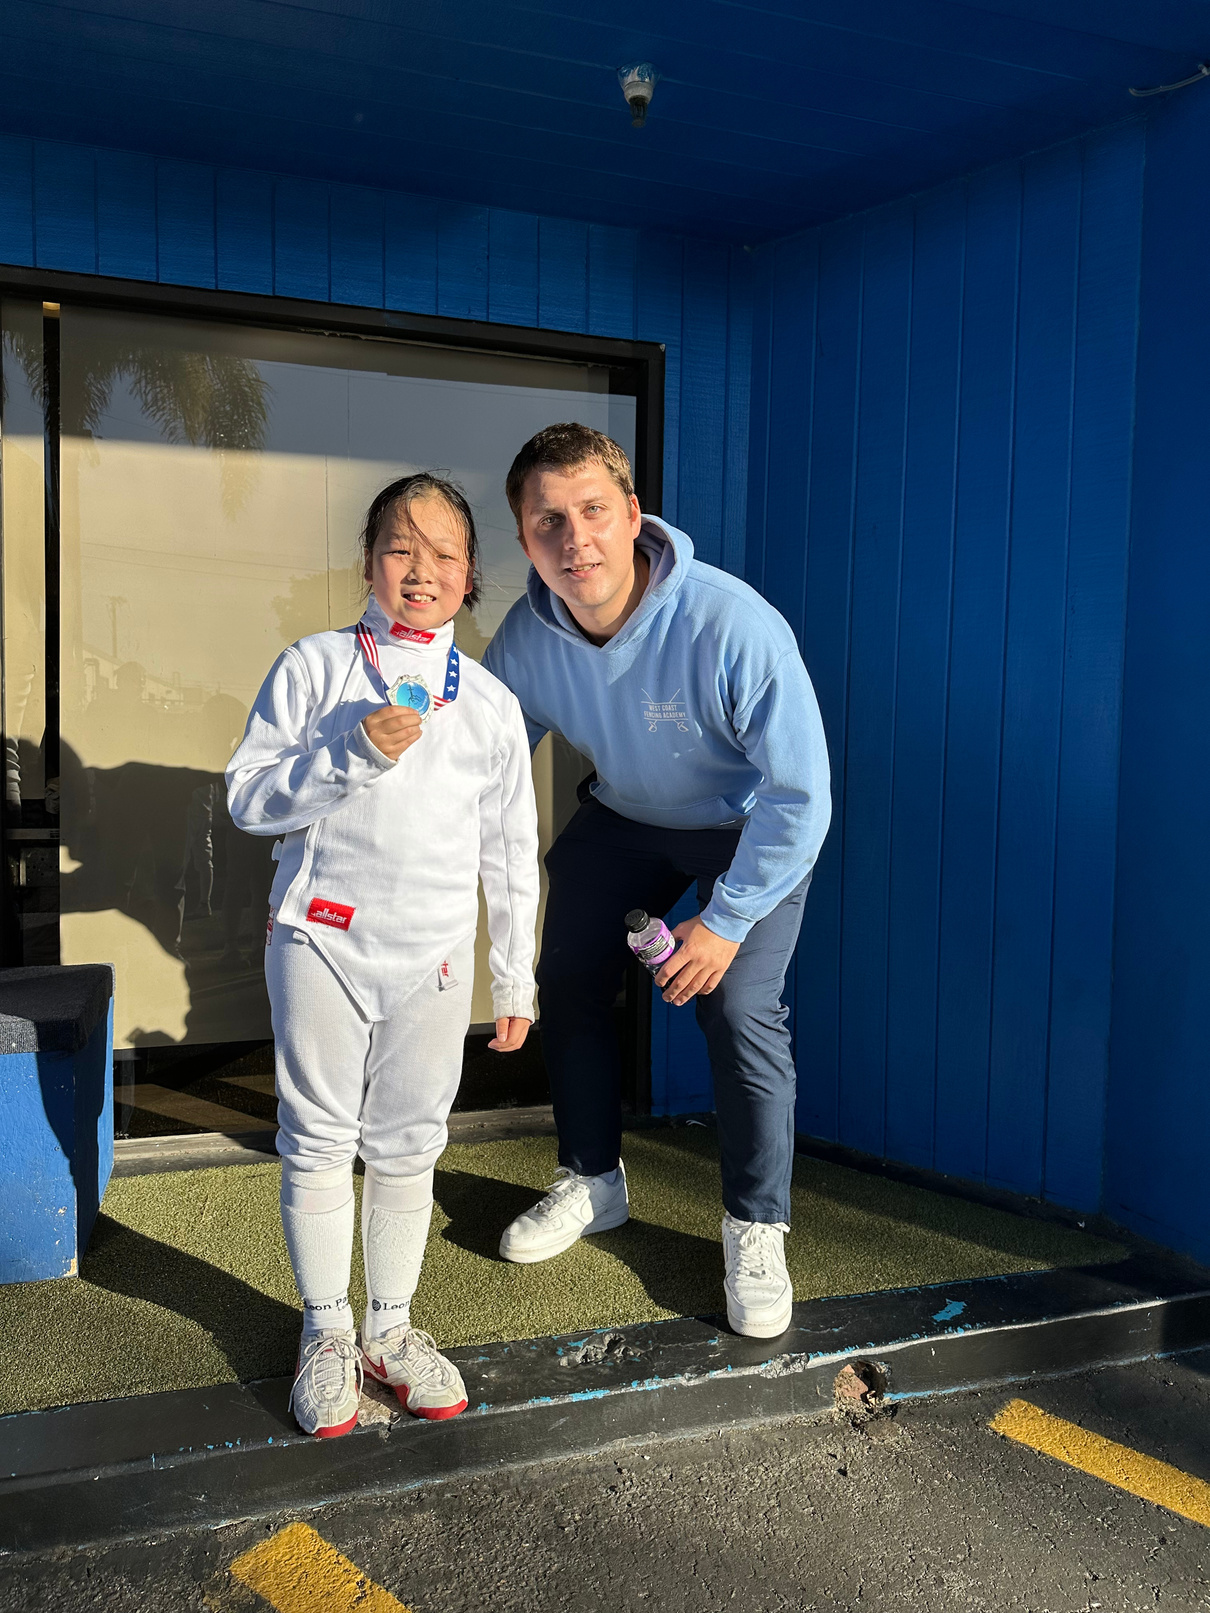 coach mike kishchenkov posing with girl saber fencing student holding a medal she won at her fencing tournament